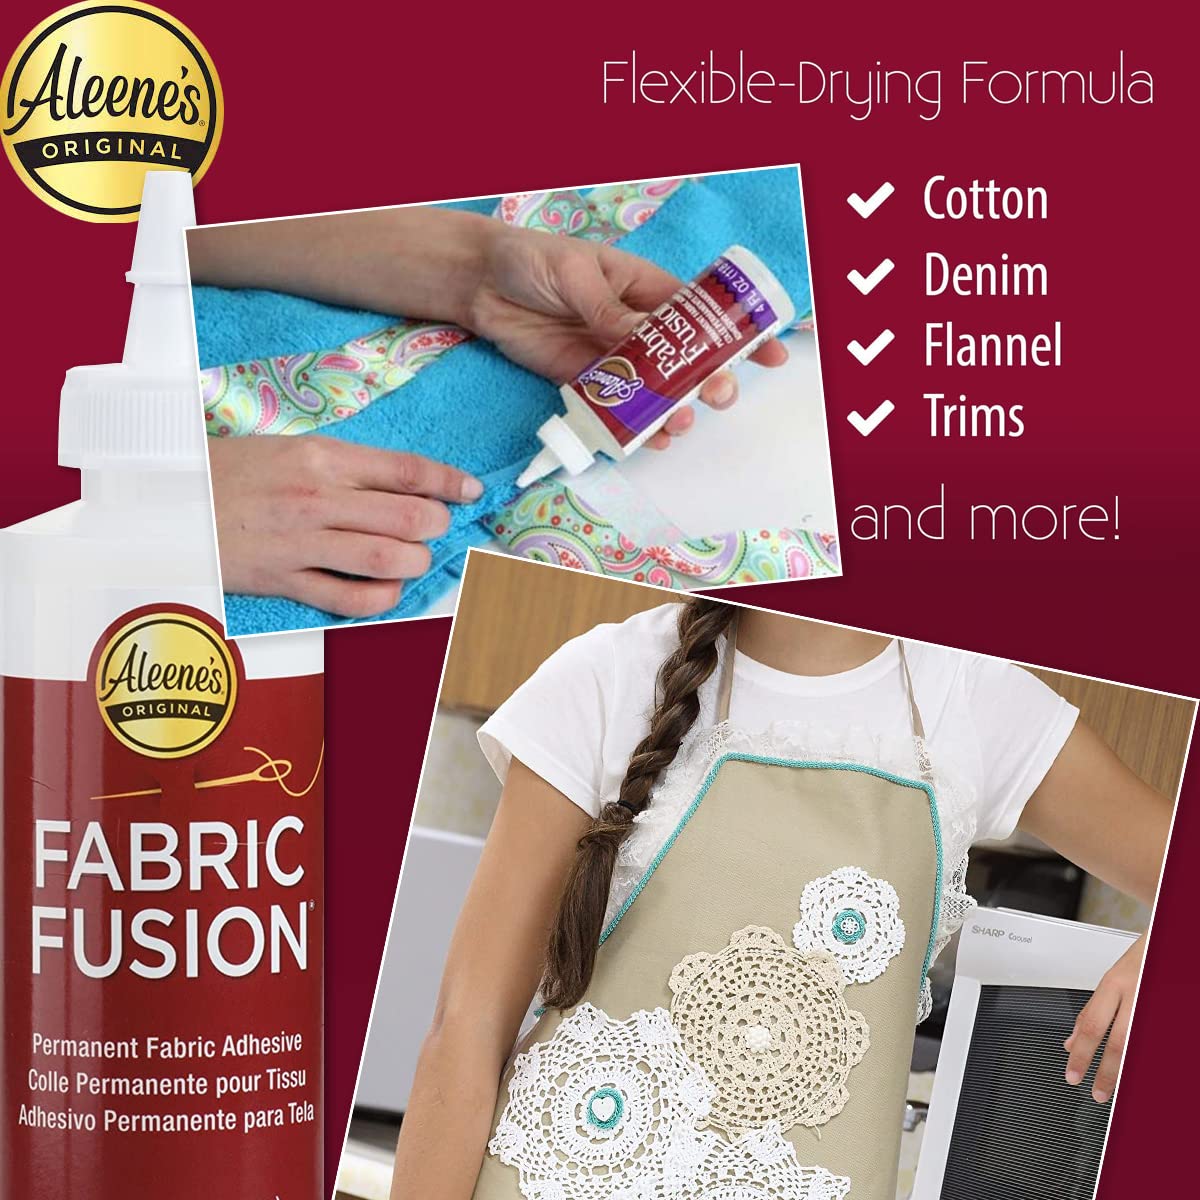 Fabric Fusion Fabric Glue Permanent Clear Washable 4oz for Patches, Rug  Glue, Clothing Glue, No Sew Fabric Glue with Pixiss Art Dotting Stylus Pens  5 pcs Set